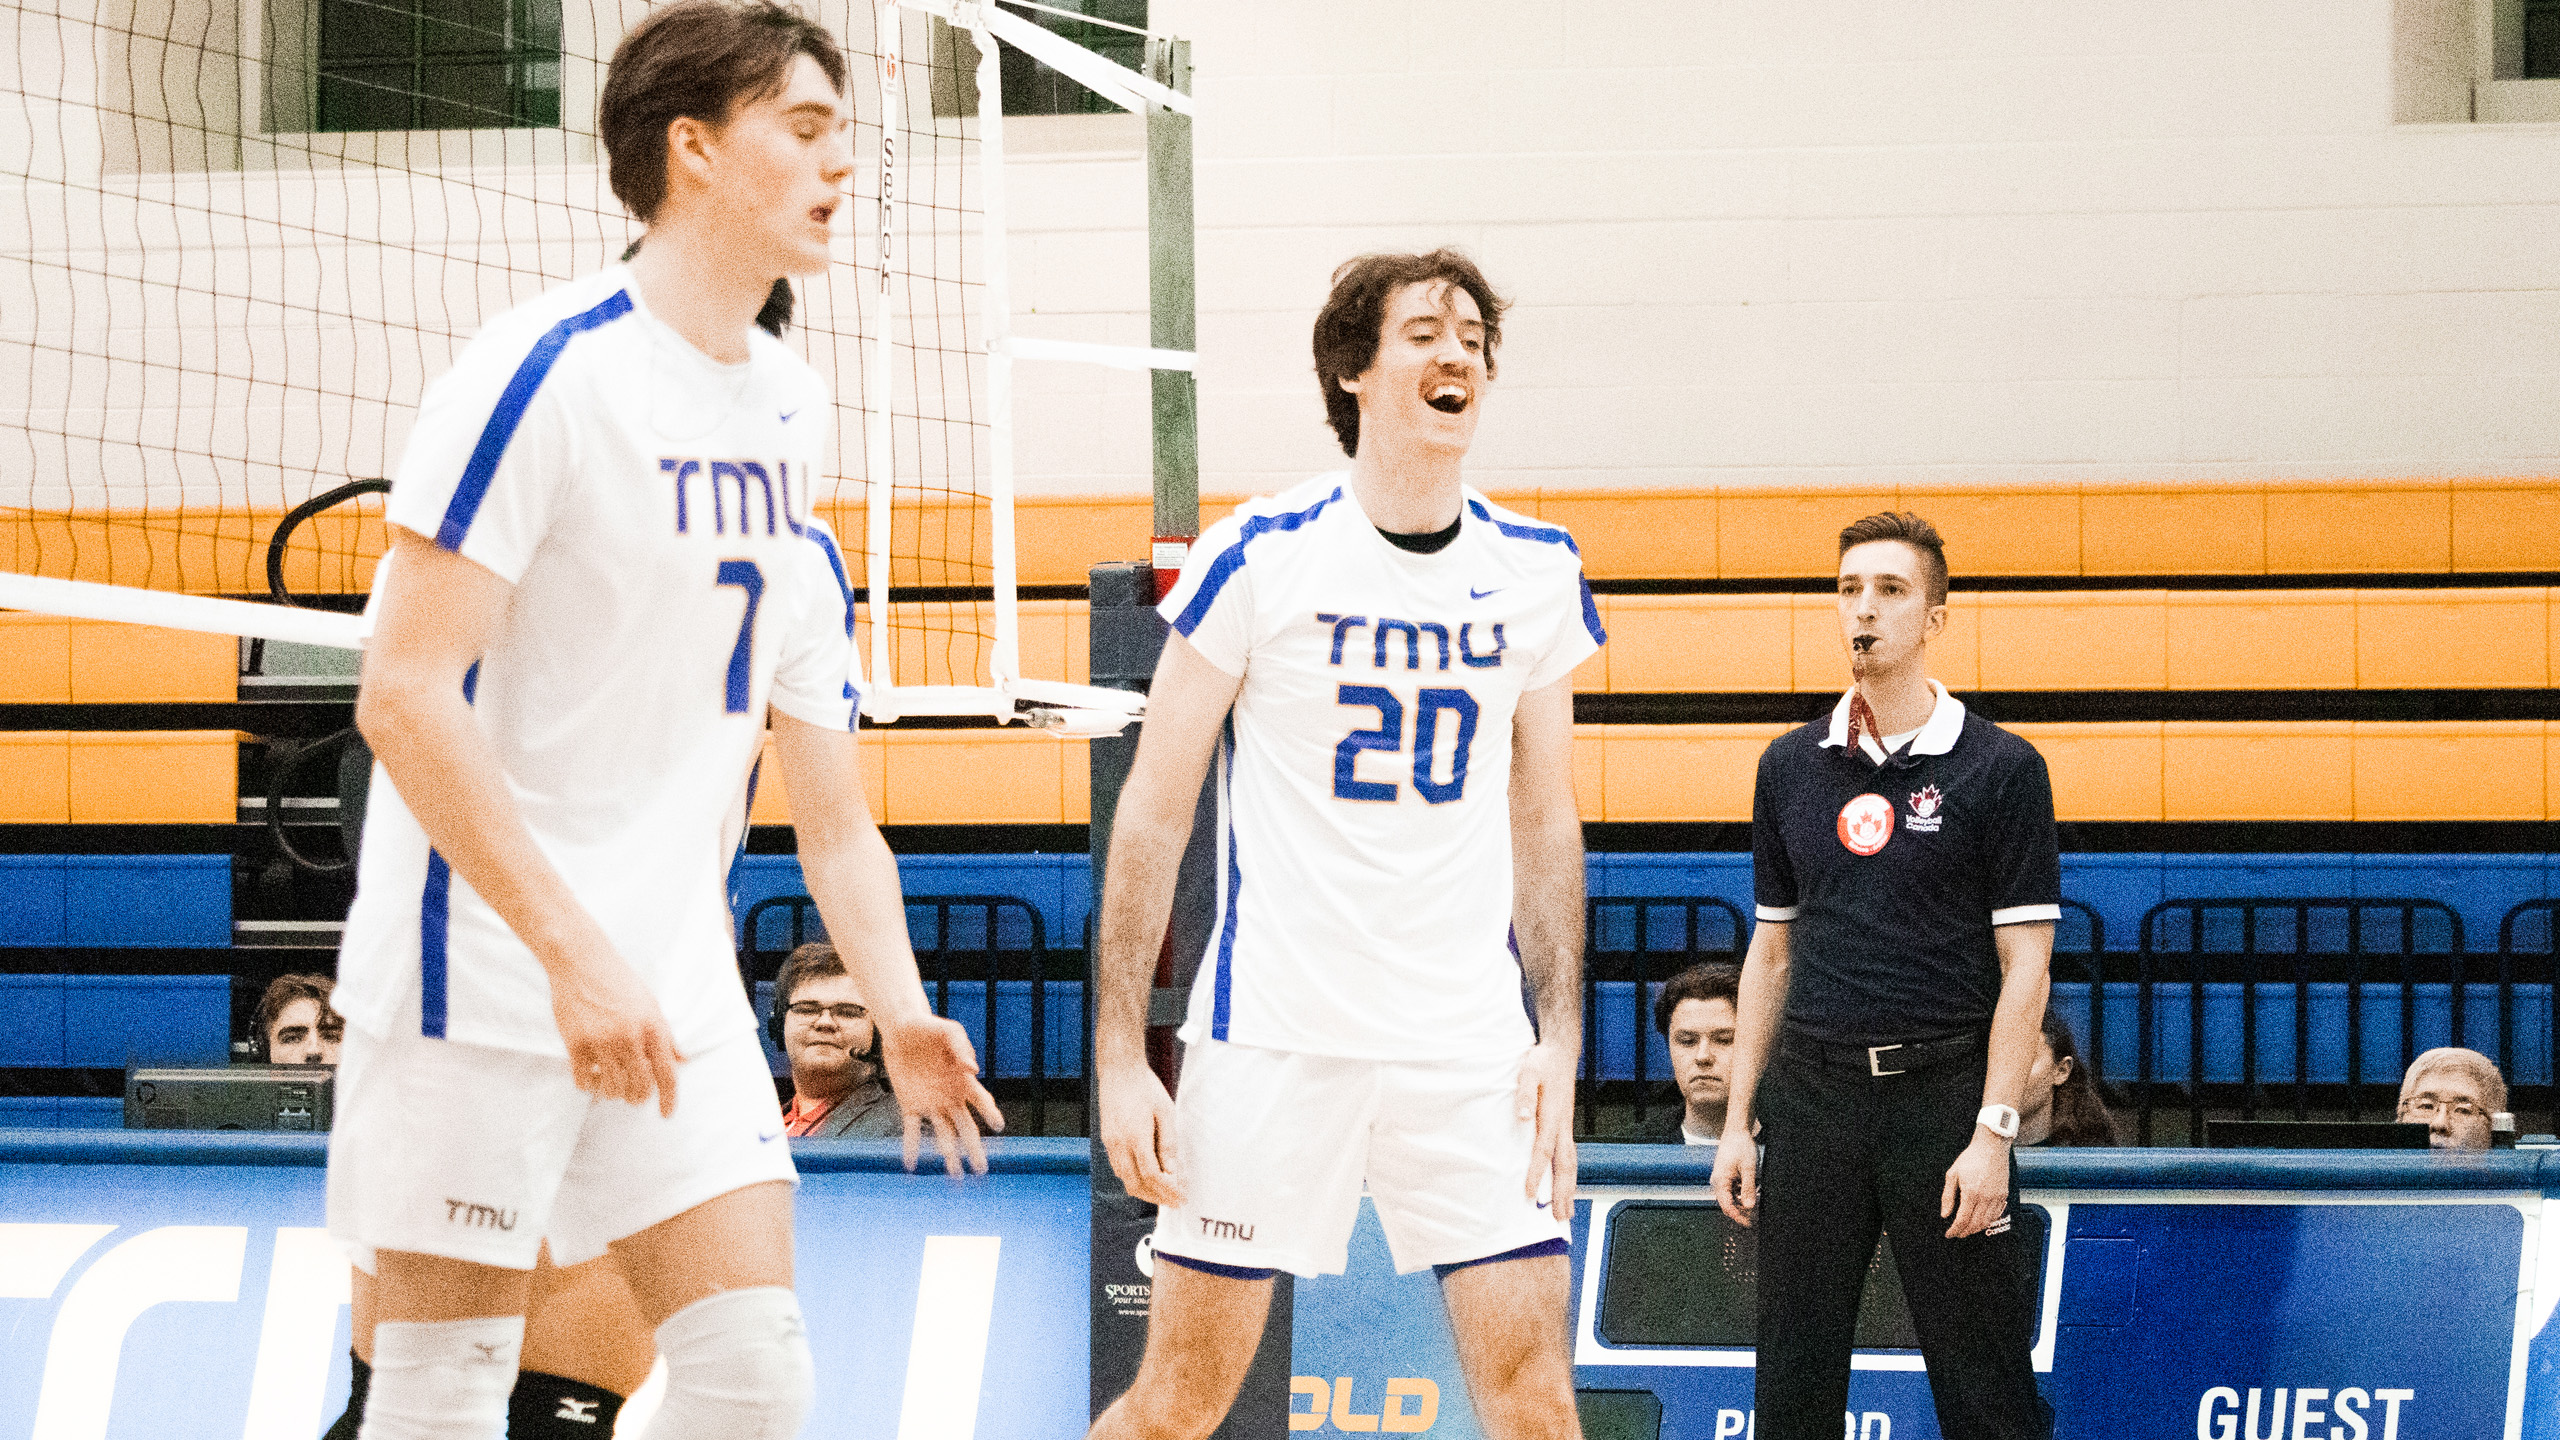 TMU men's volleyball player Alex King yells in celebration alongside Ben Davey on the court